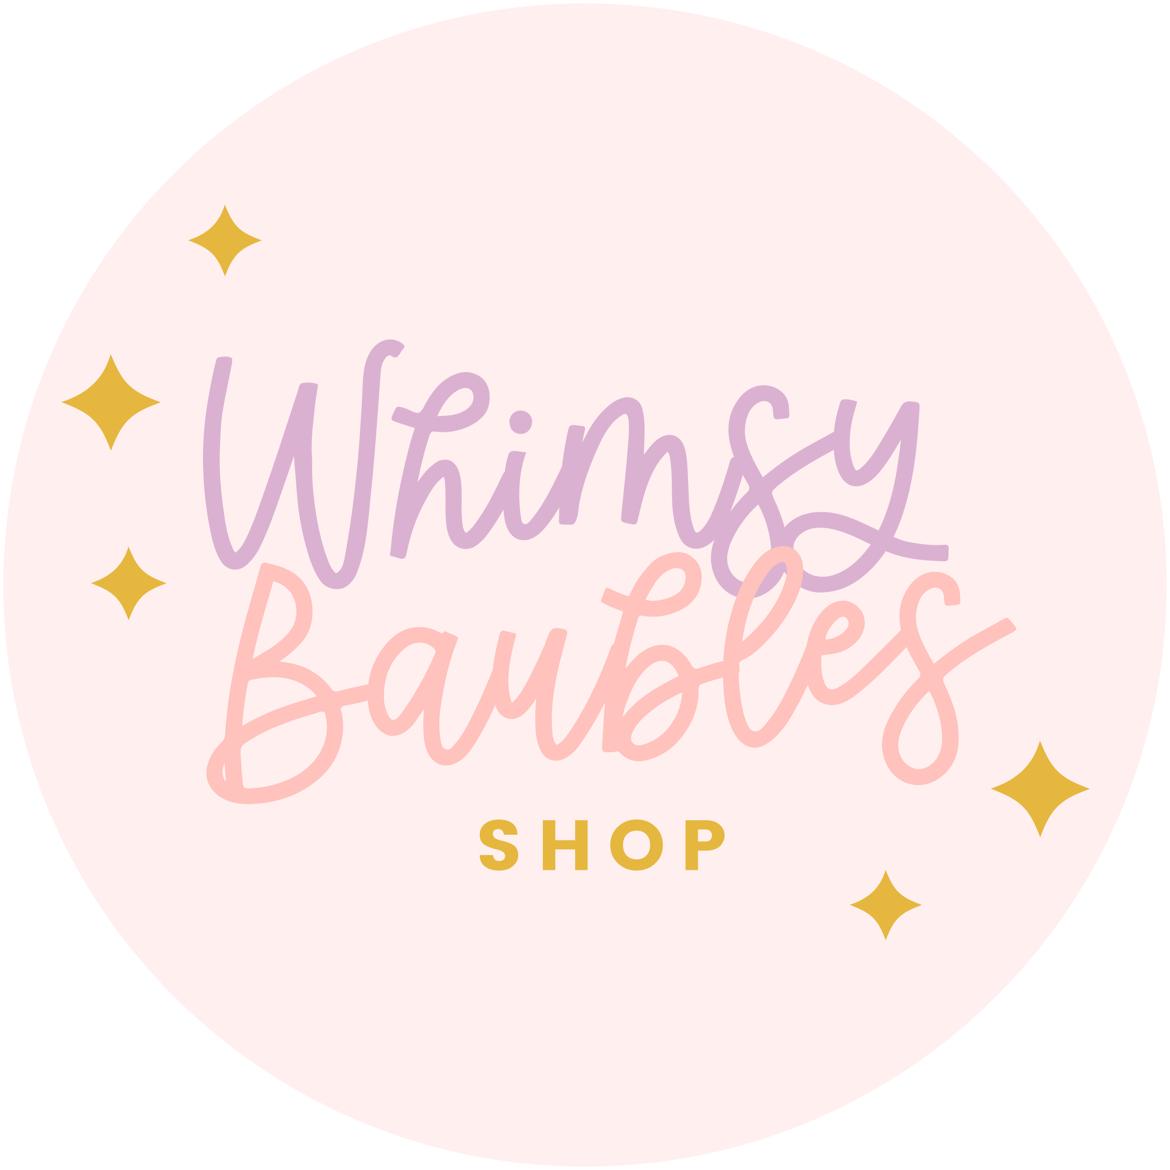 Whimsy Baubles's images